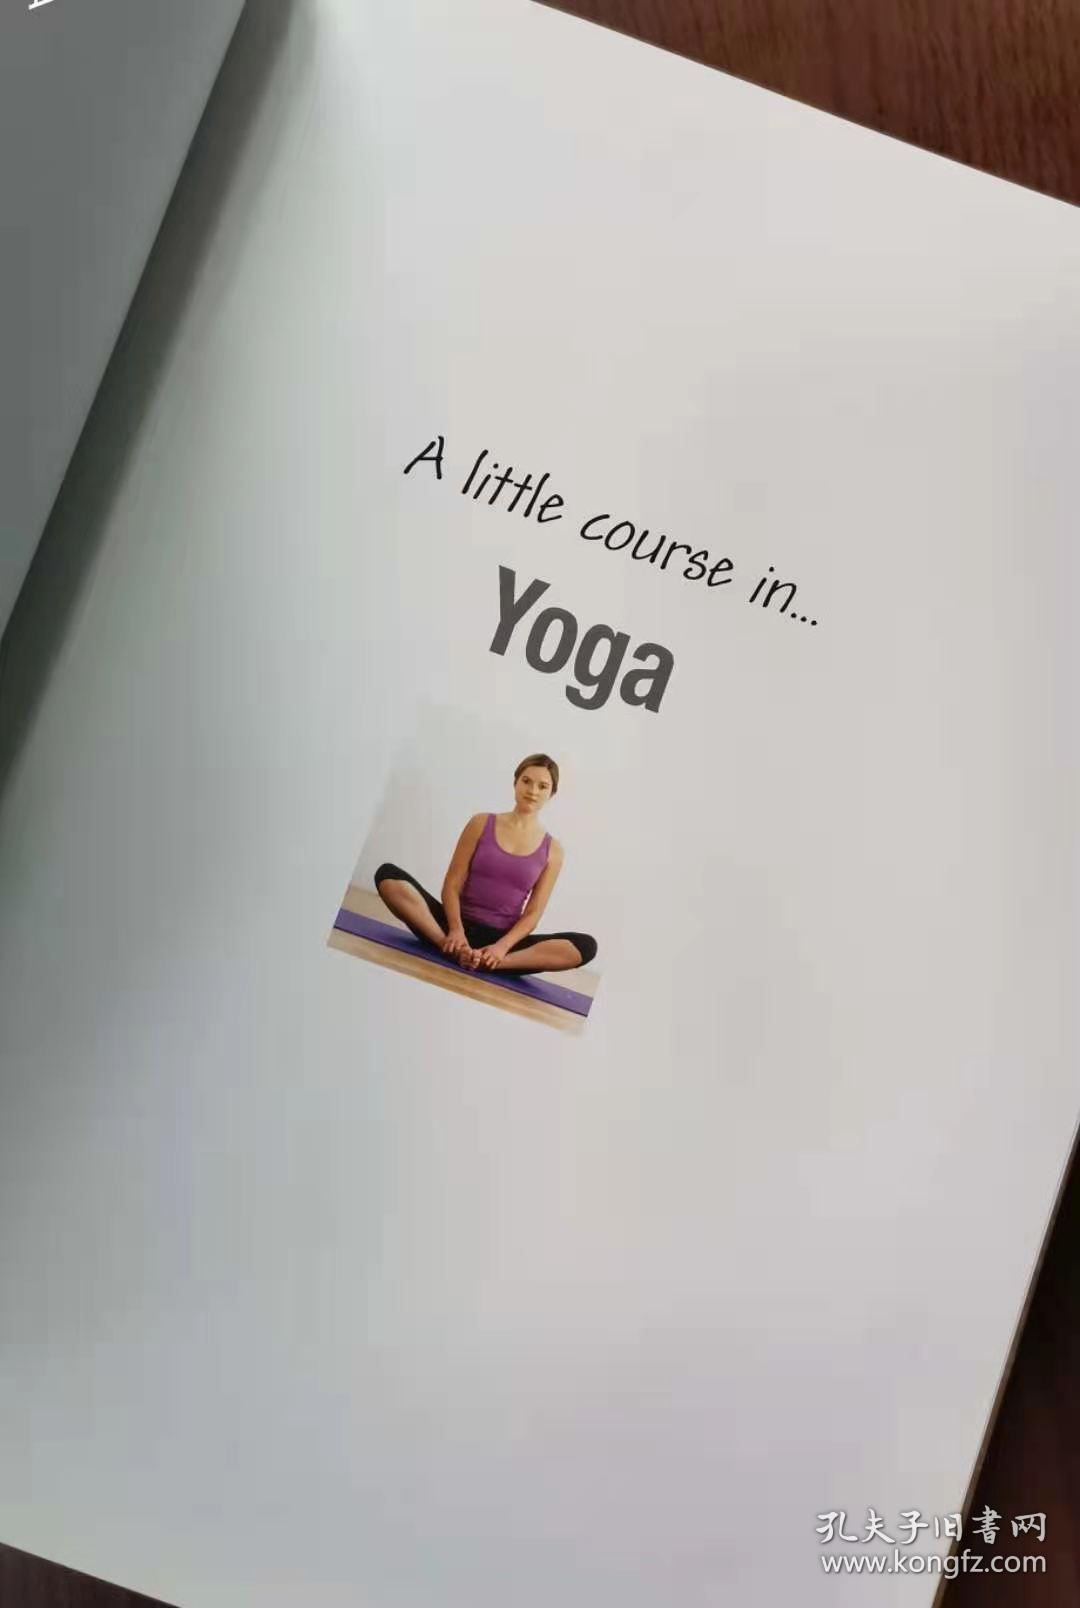 A Little Course In Yoga 《一堂瑜伽课》